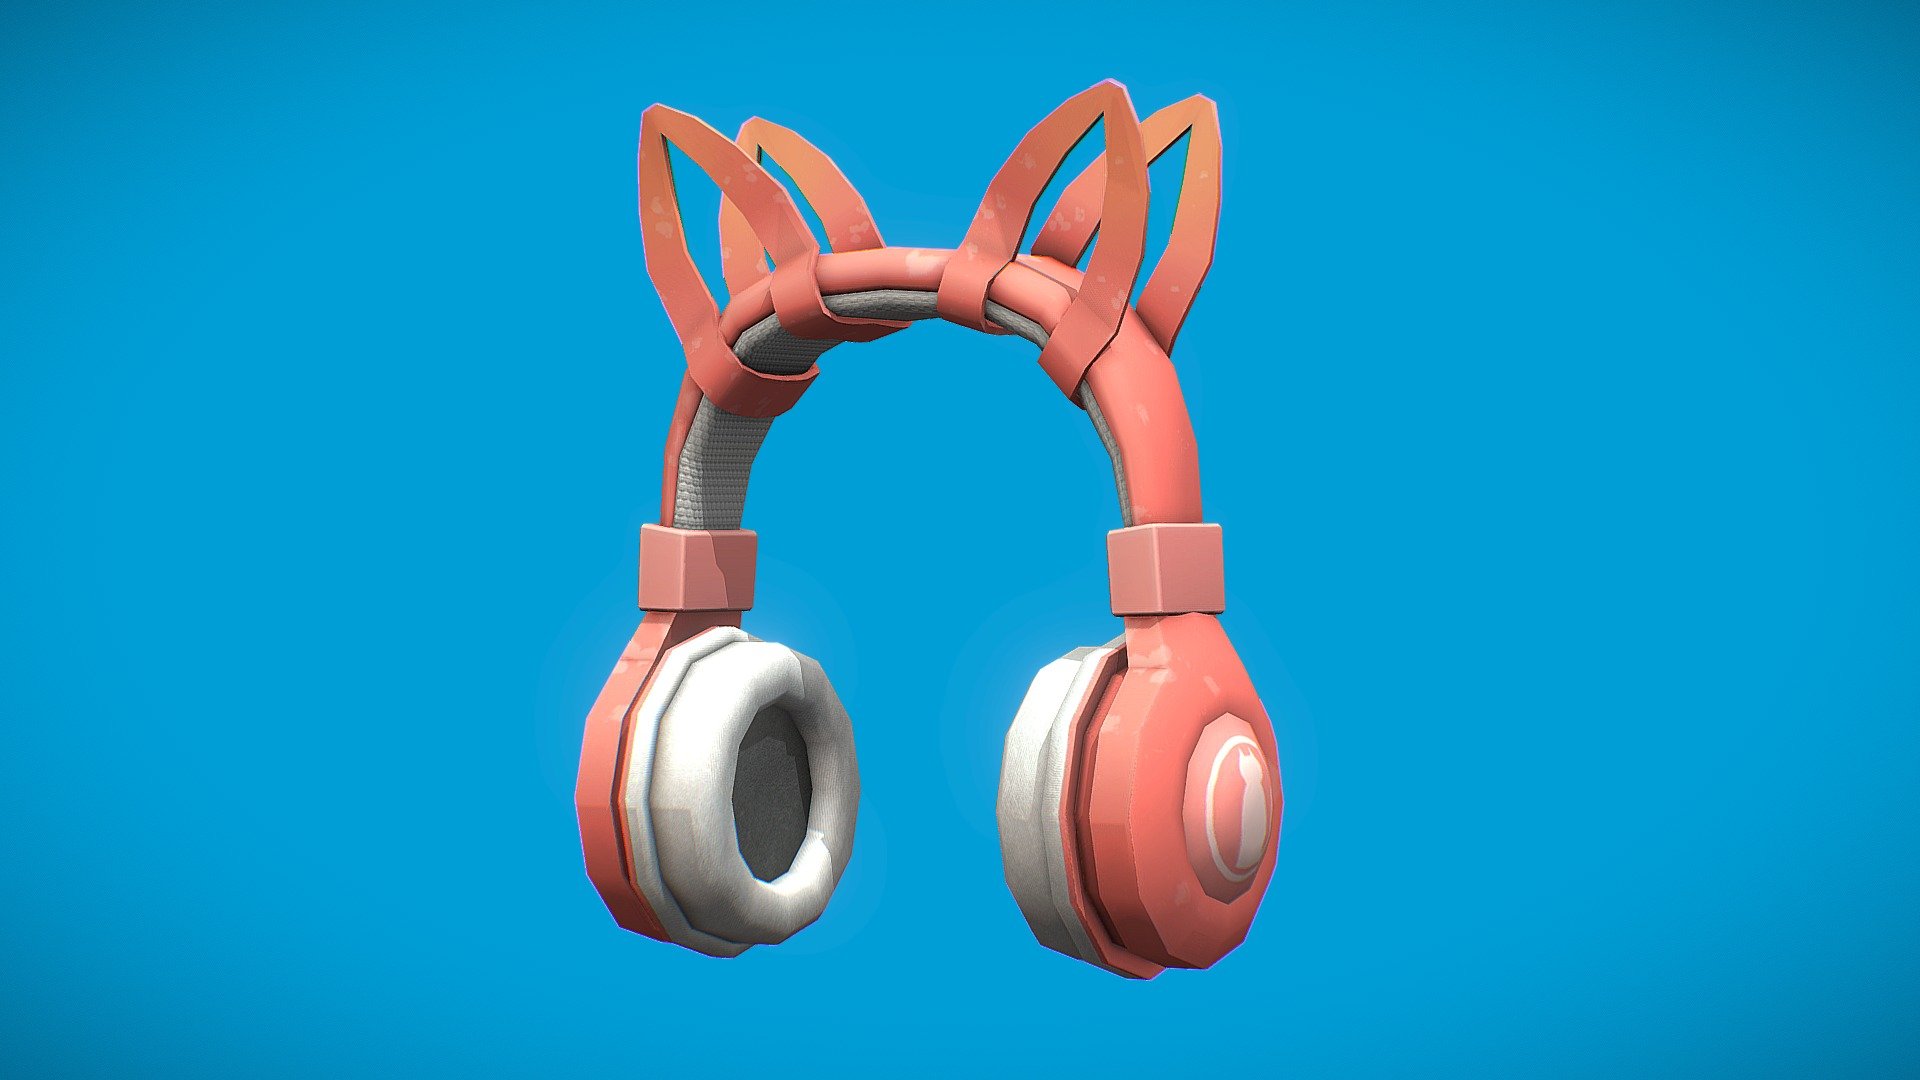 Low Poly Cat Headphone for your renders and games

Textures:

Diffuse color, Roughness, Height, Normal

All textures are 2K

Files Formats:

Blend

Fbx

Obj - Cat Headphone - Buy Royalty Free 3D model by Vanessa Araújo (@vanessa3d) 3d model